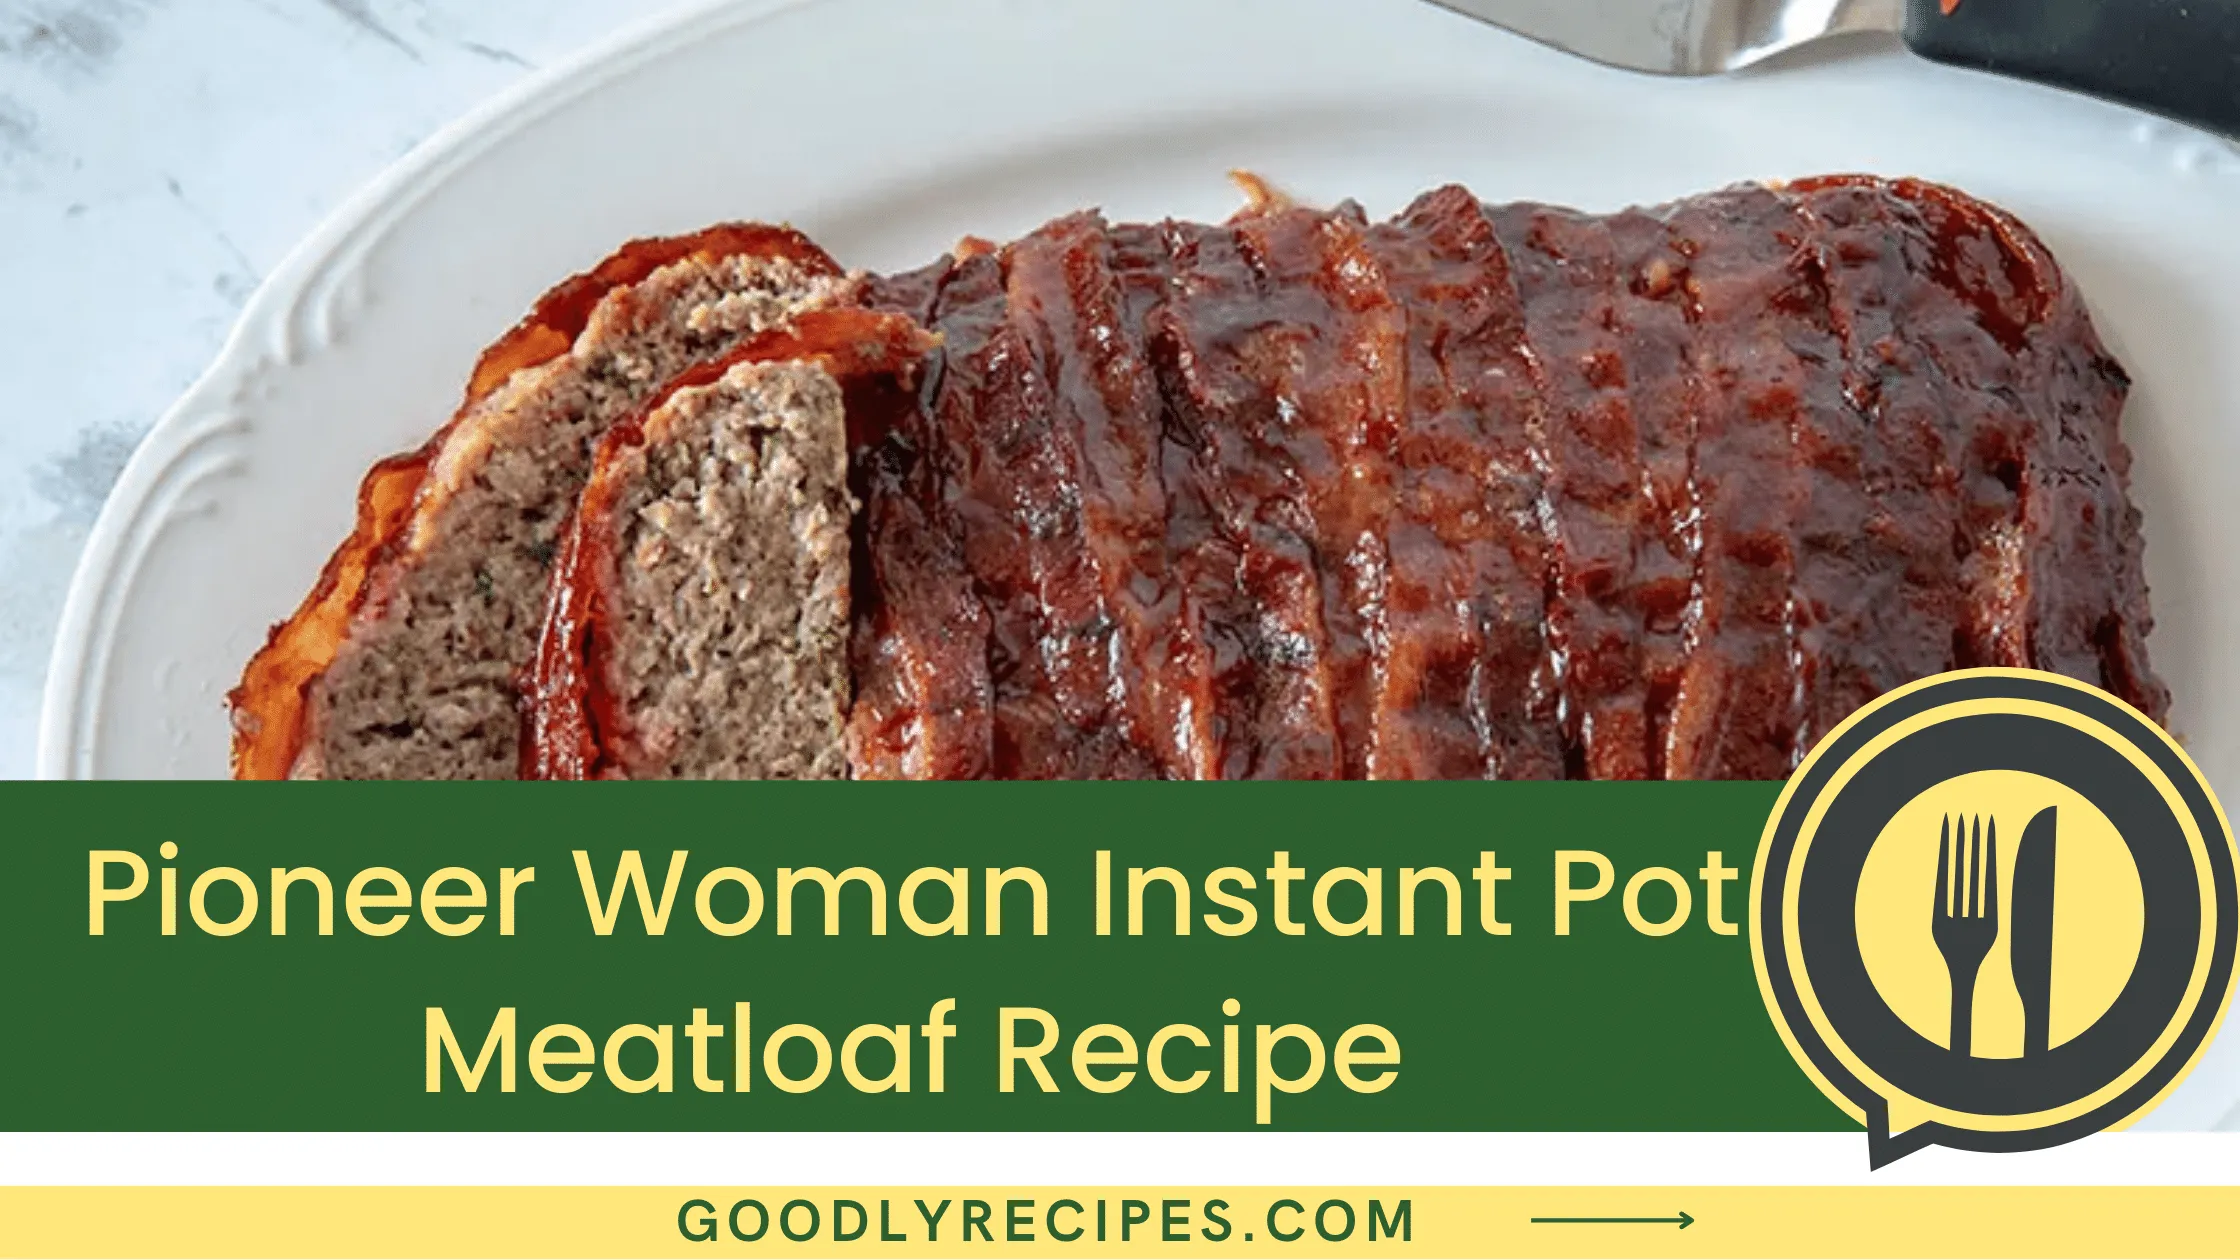 What is Pioneer Woman Instant Pot Meatloaf Recipe?